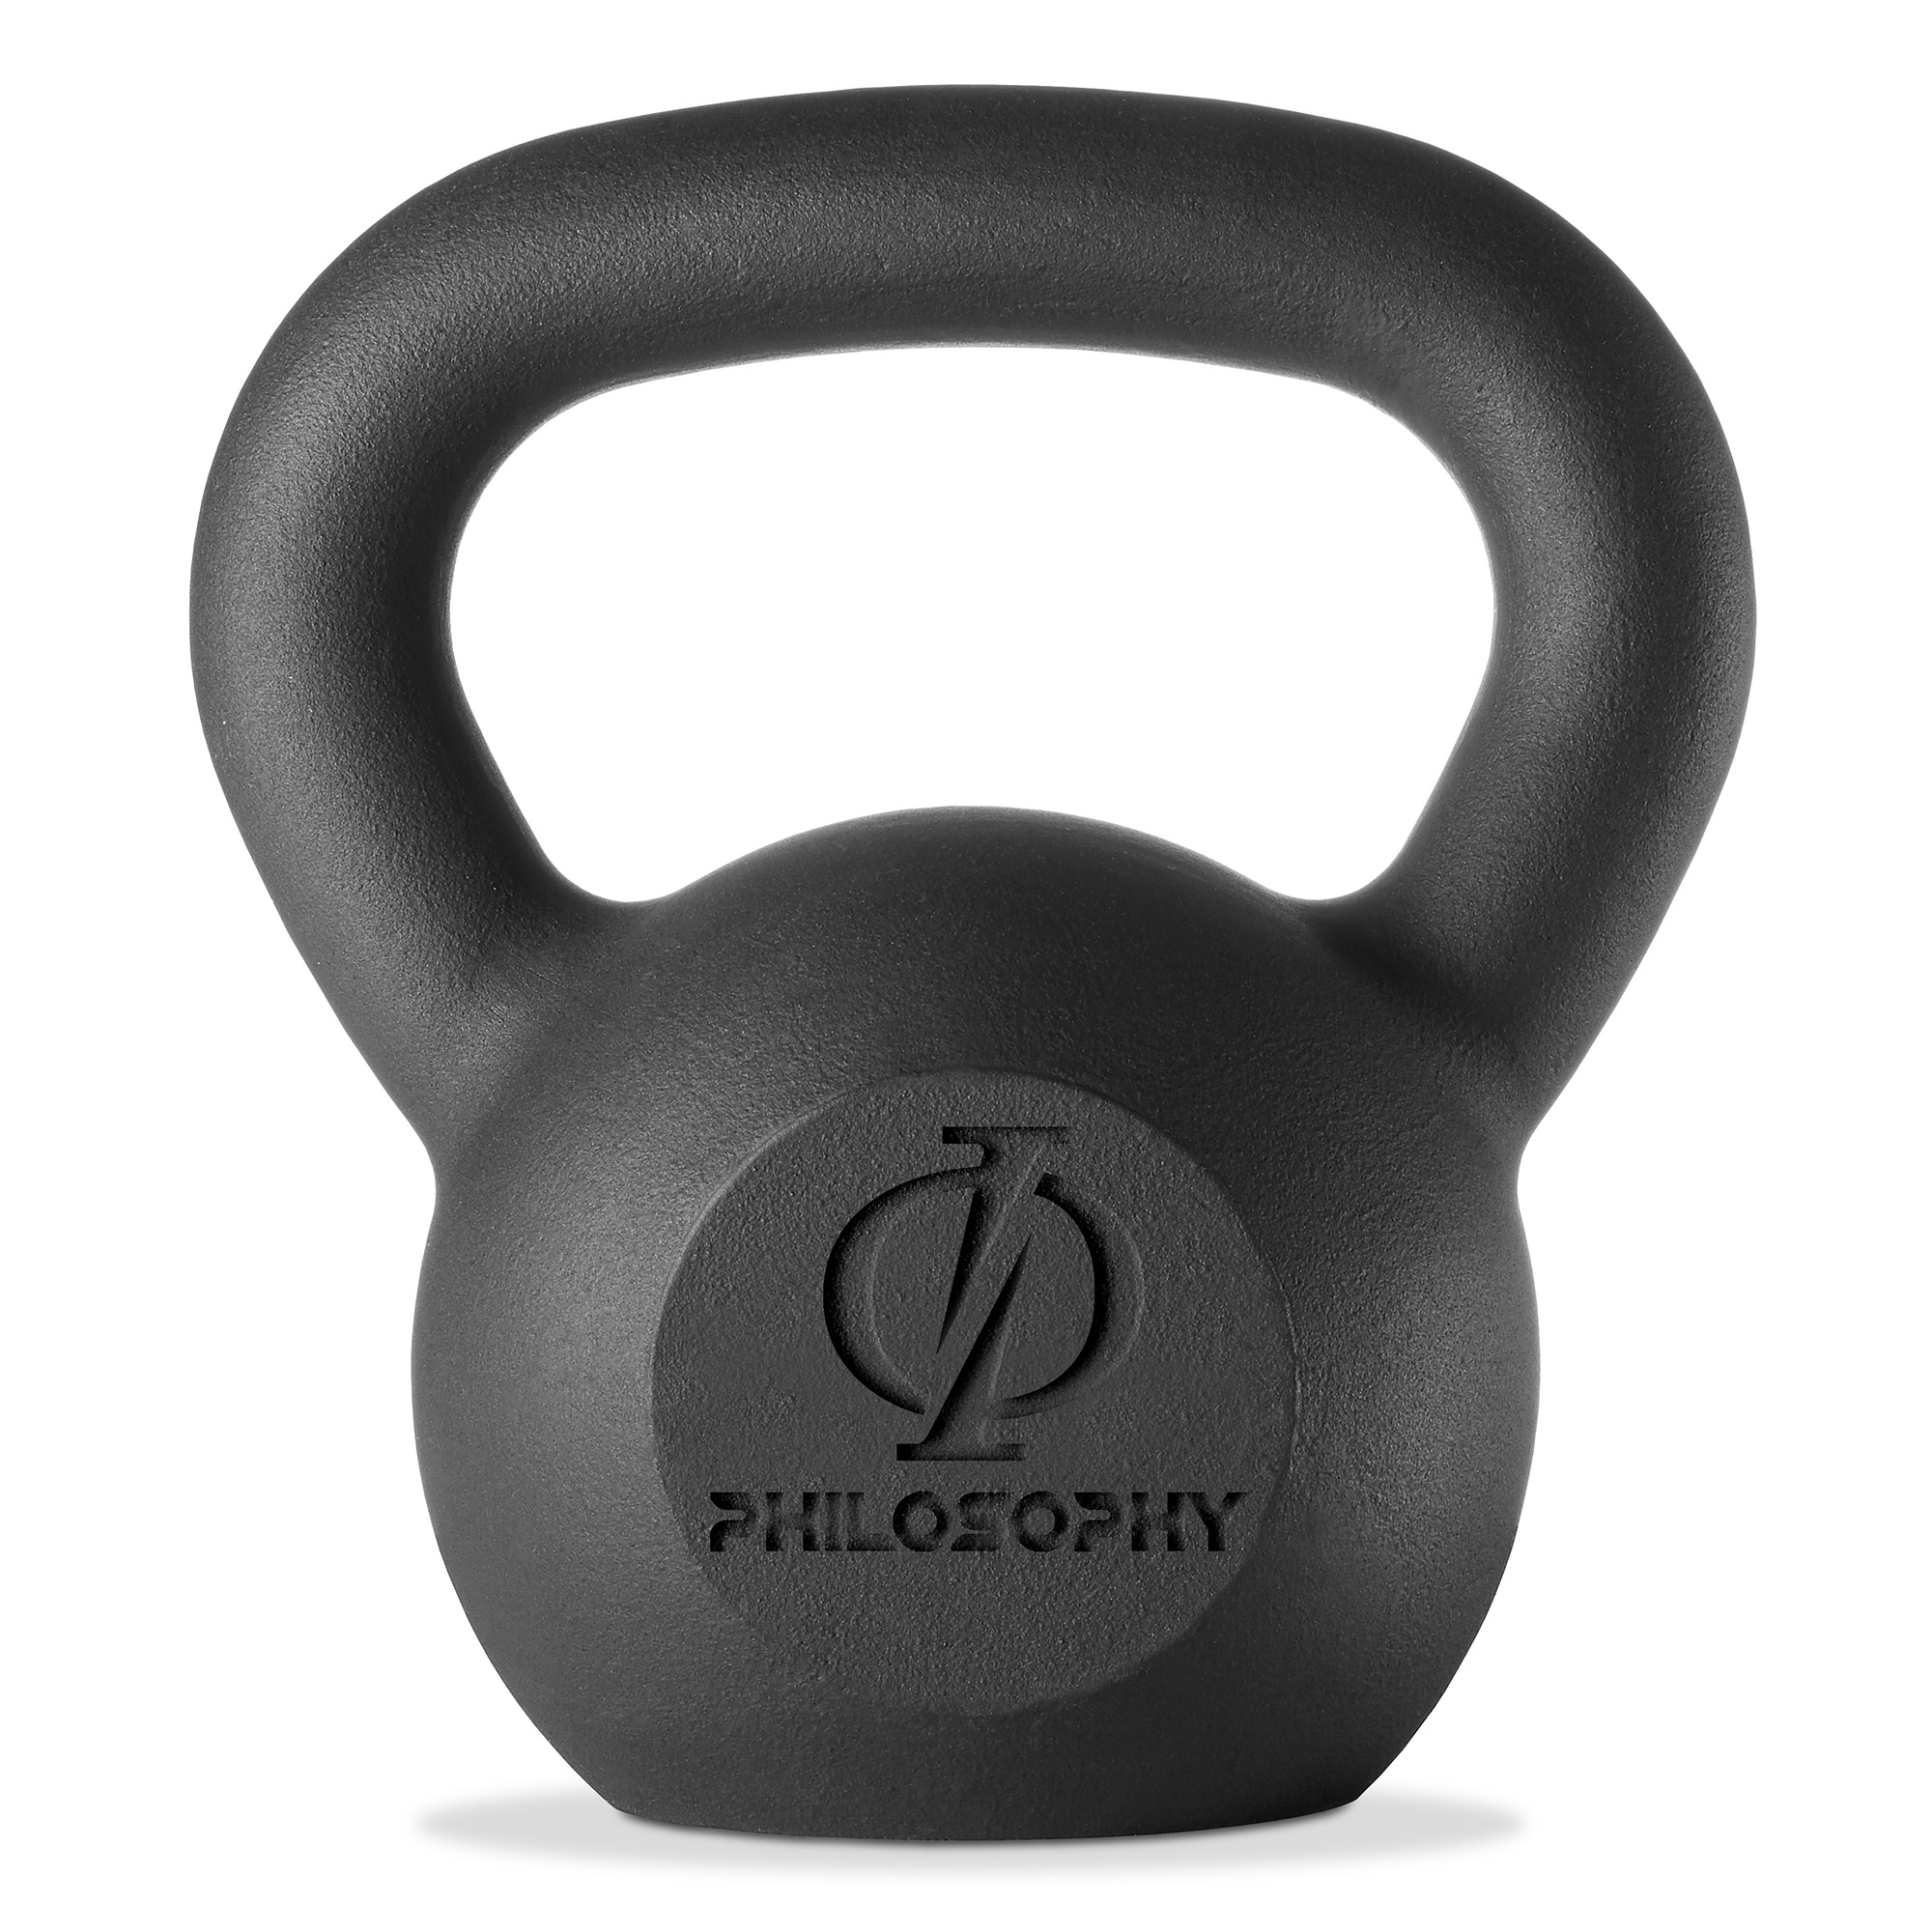 Kettlebell Set: 5-50 lb for Workouts